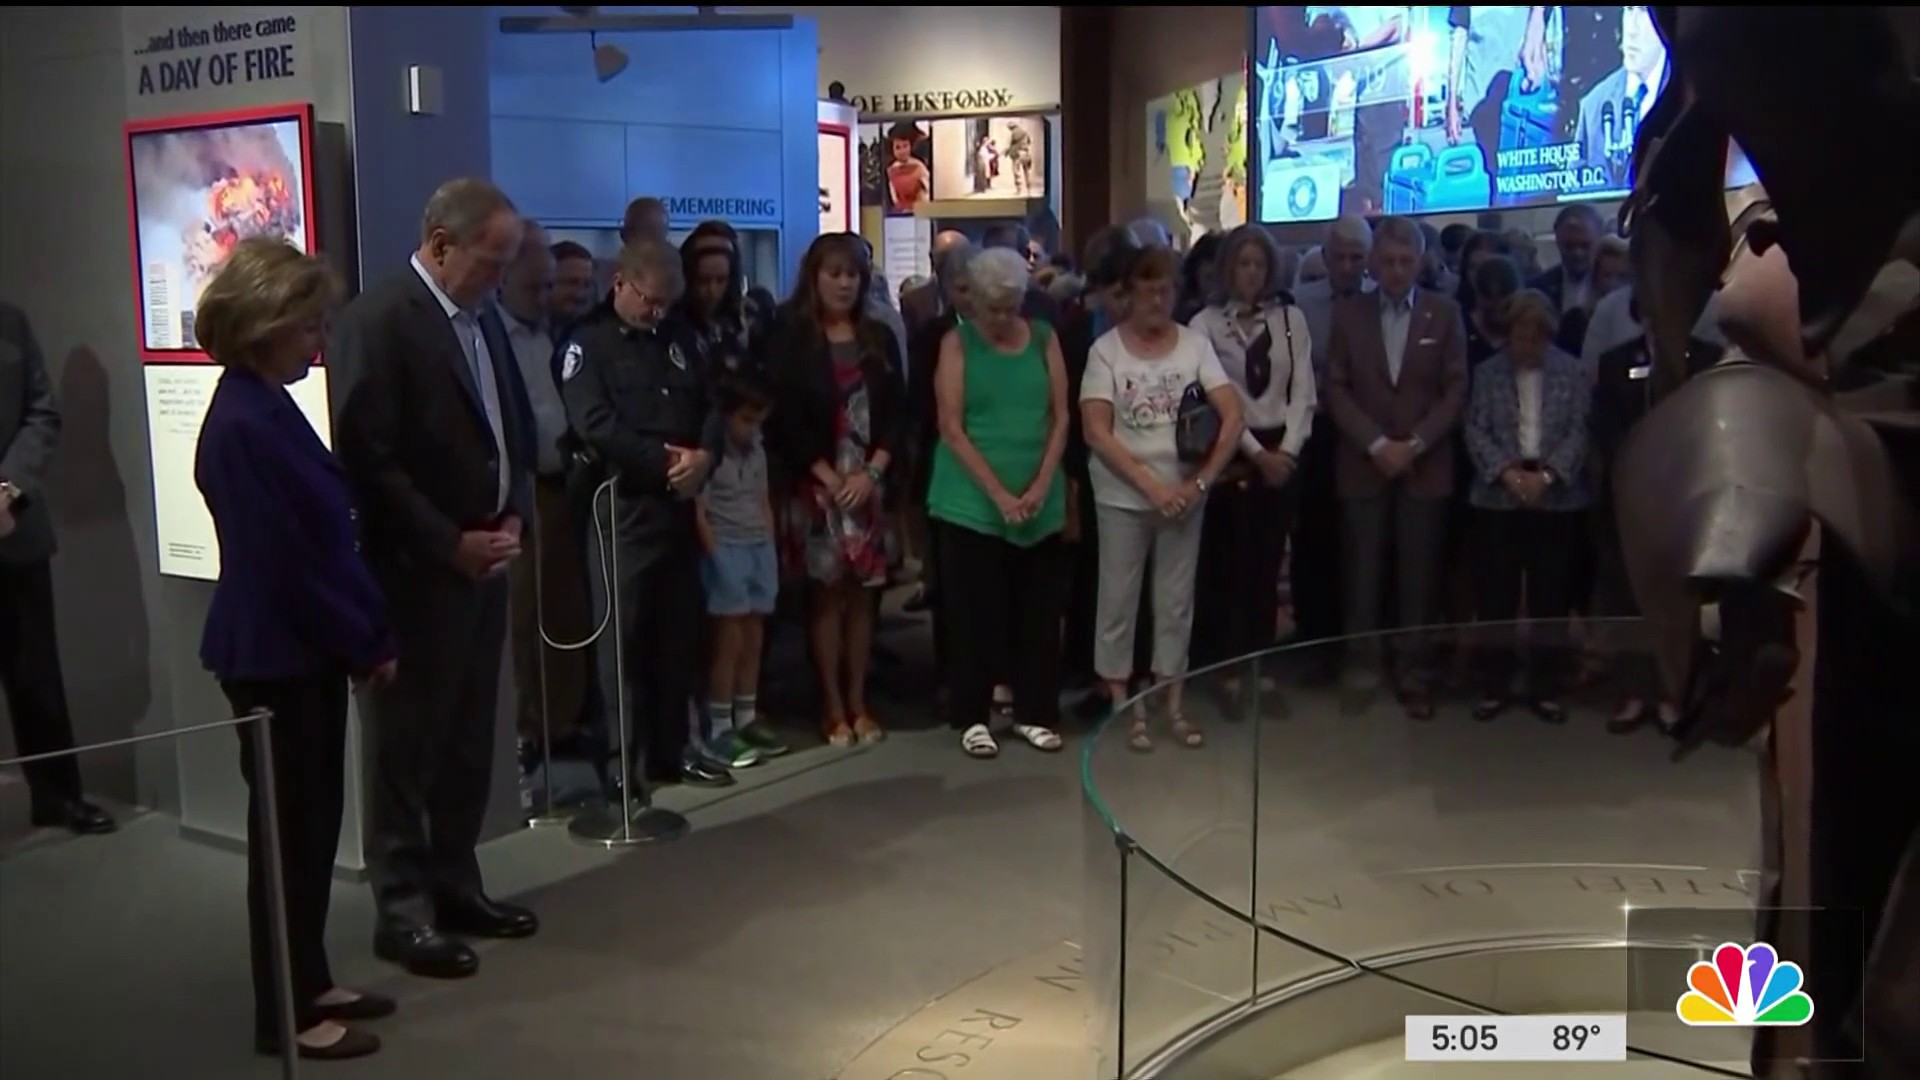 President Bush leads 9/11 moment of silence at Dallas library